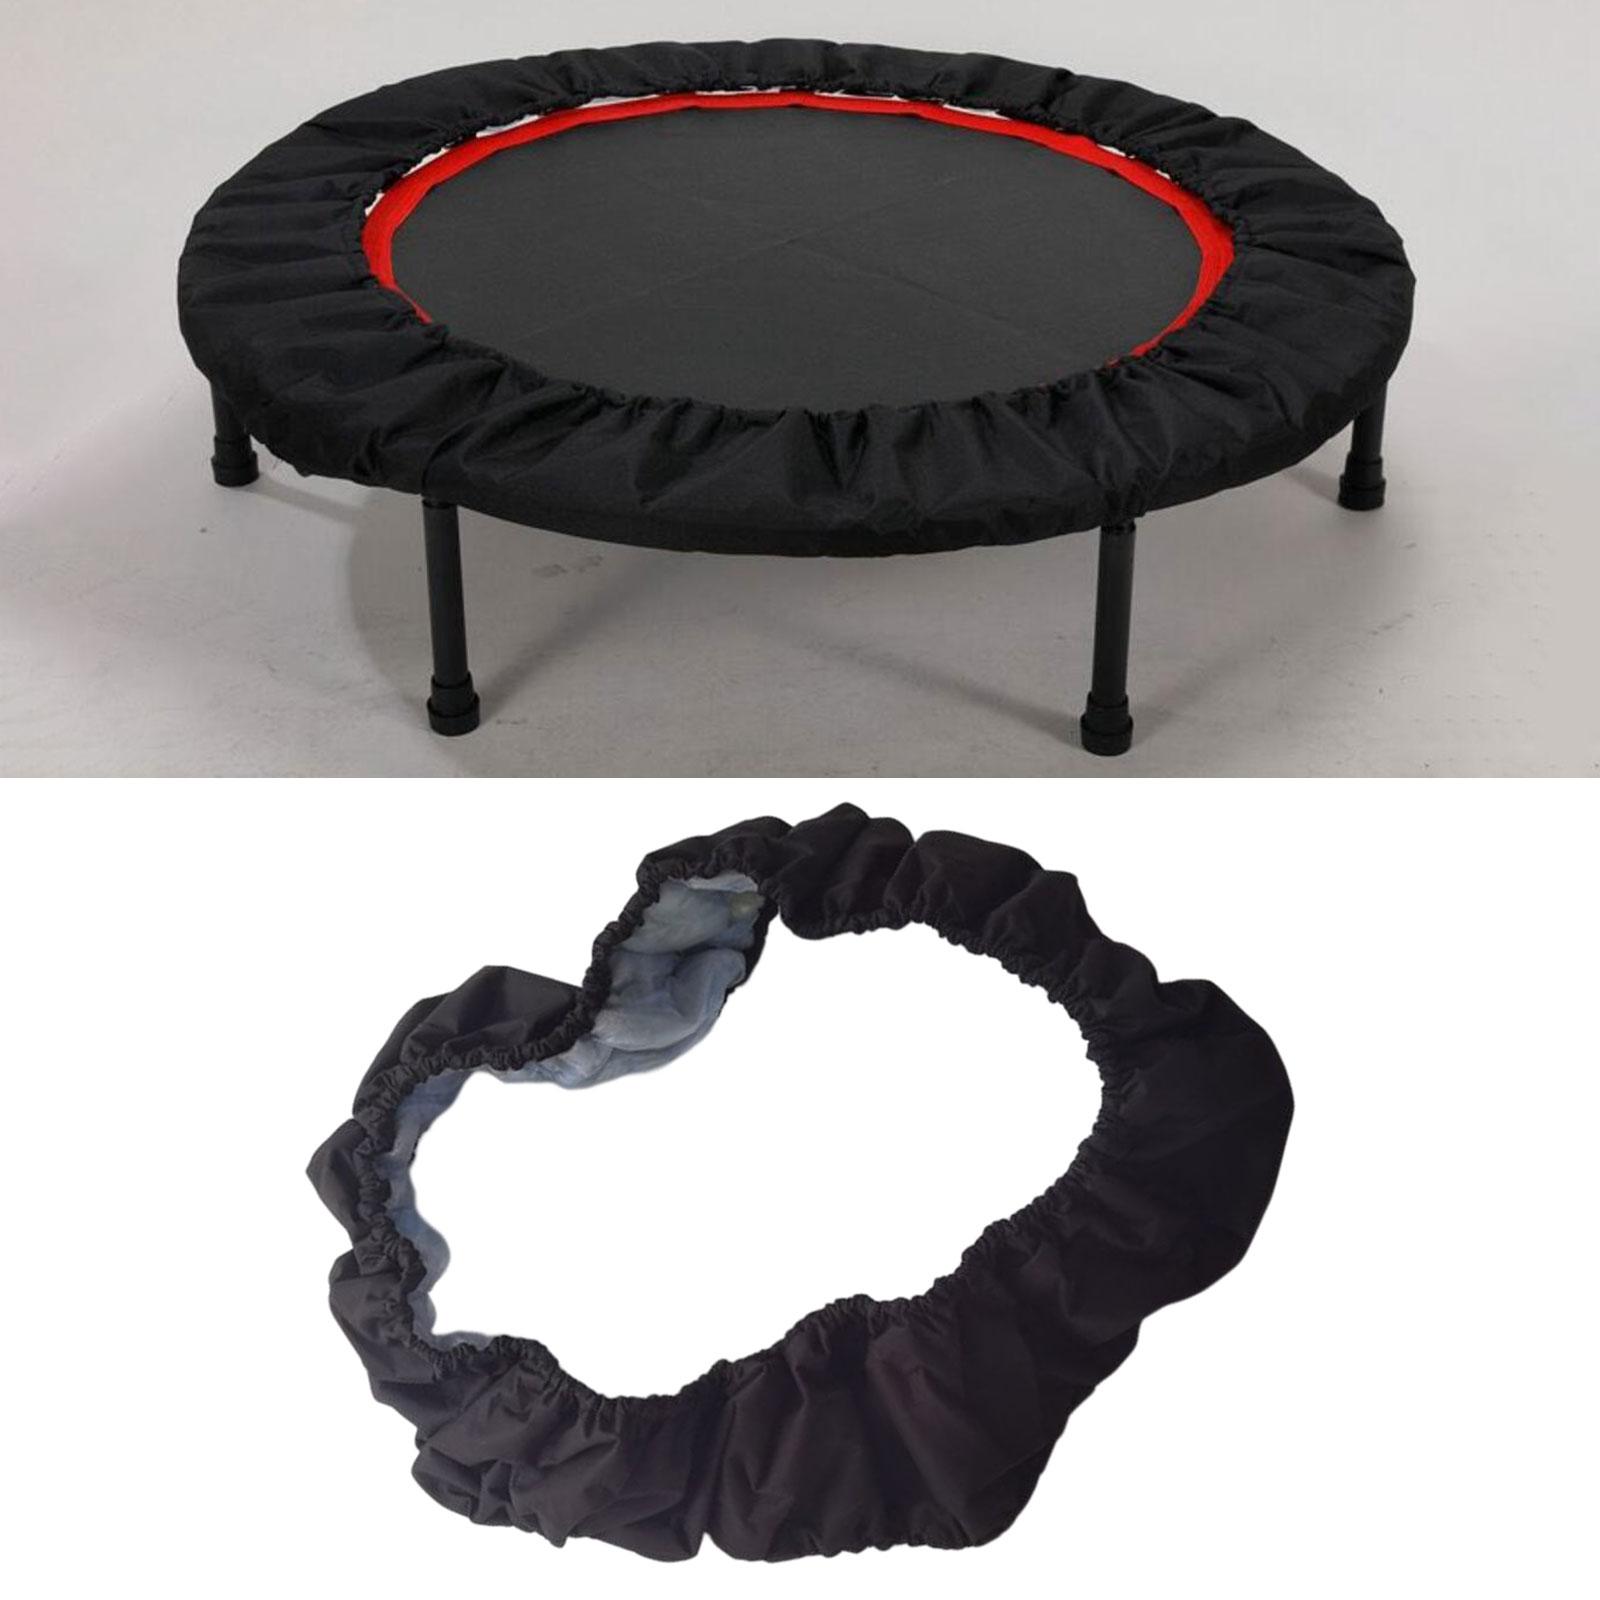 Trampoline Spring Cover Jumping Bed Cover Round Waterproof Easy to Install 45inch 8 Holes